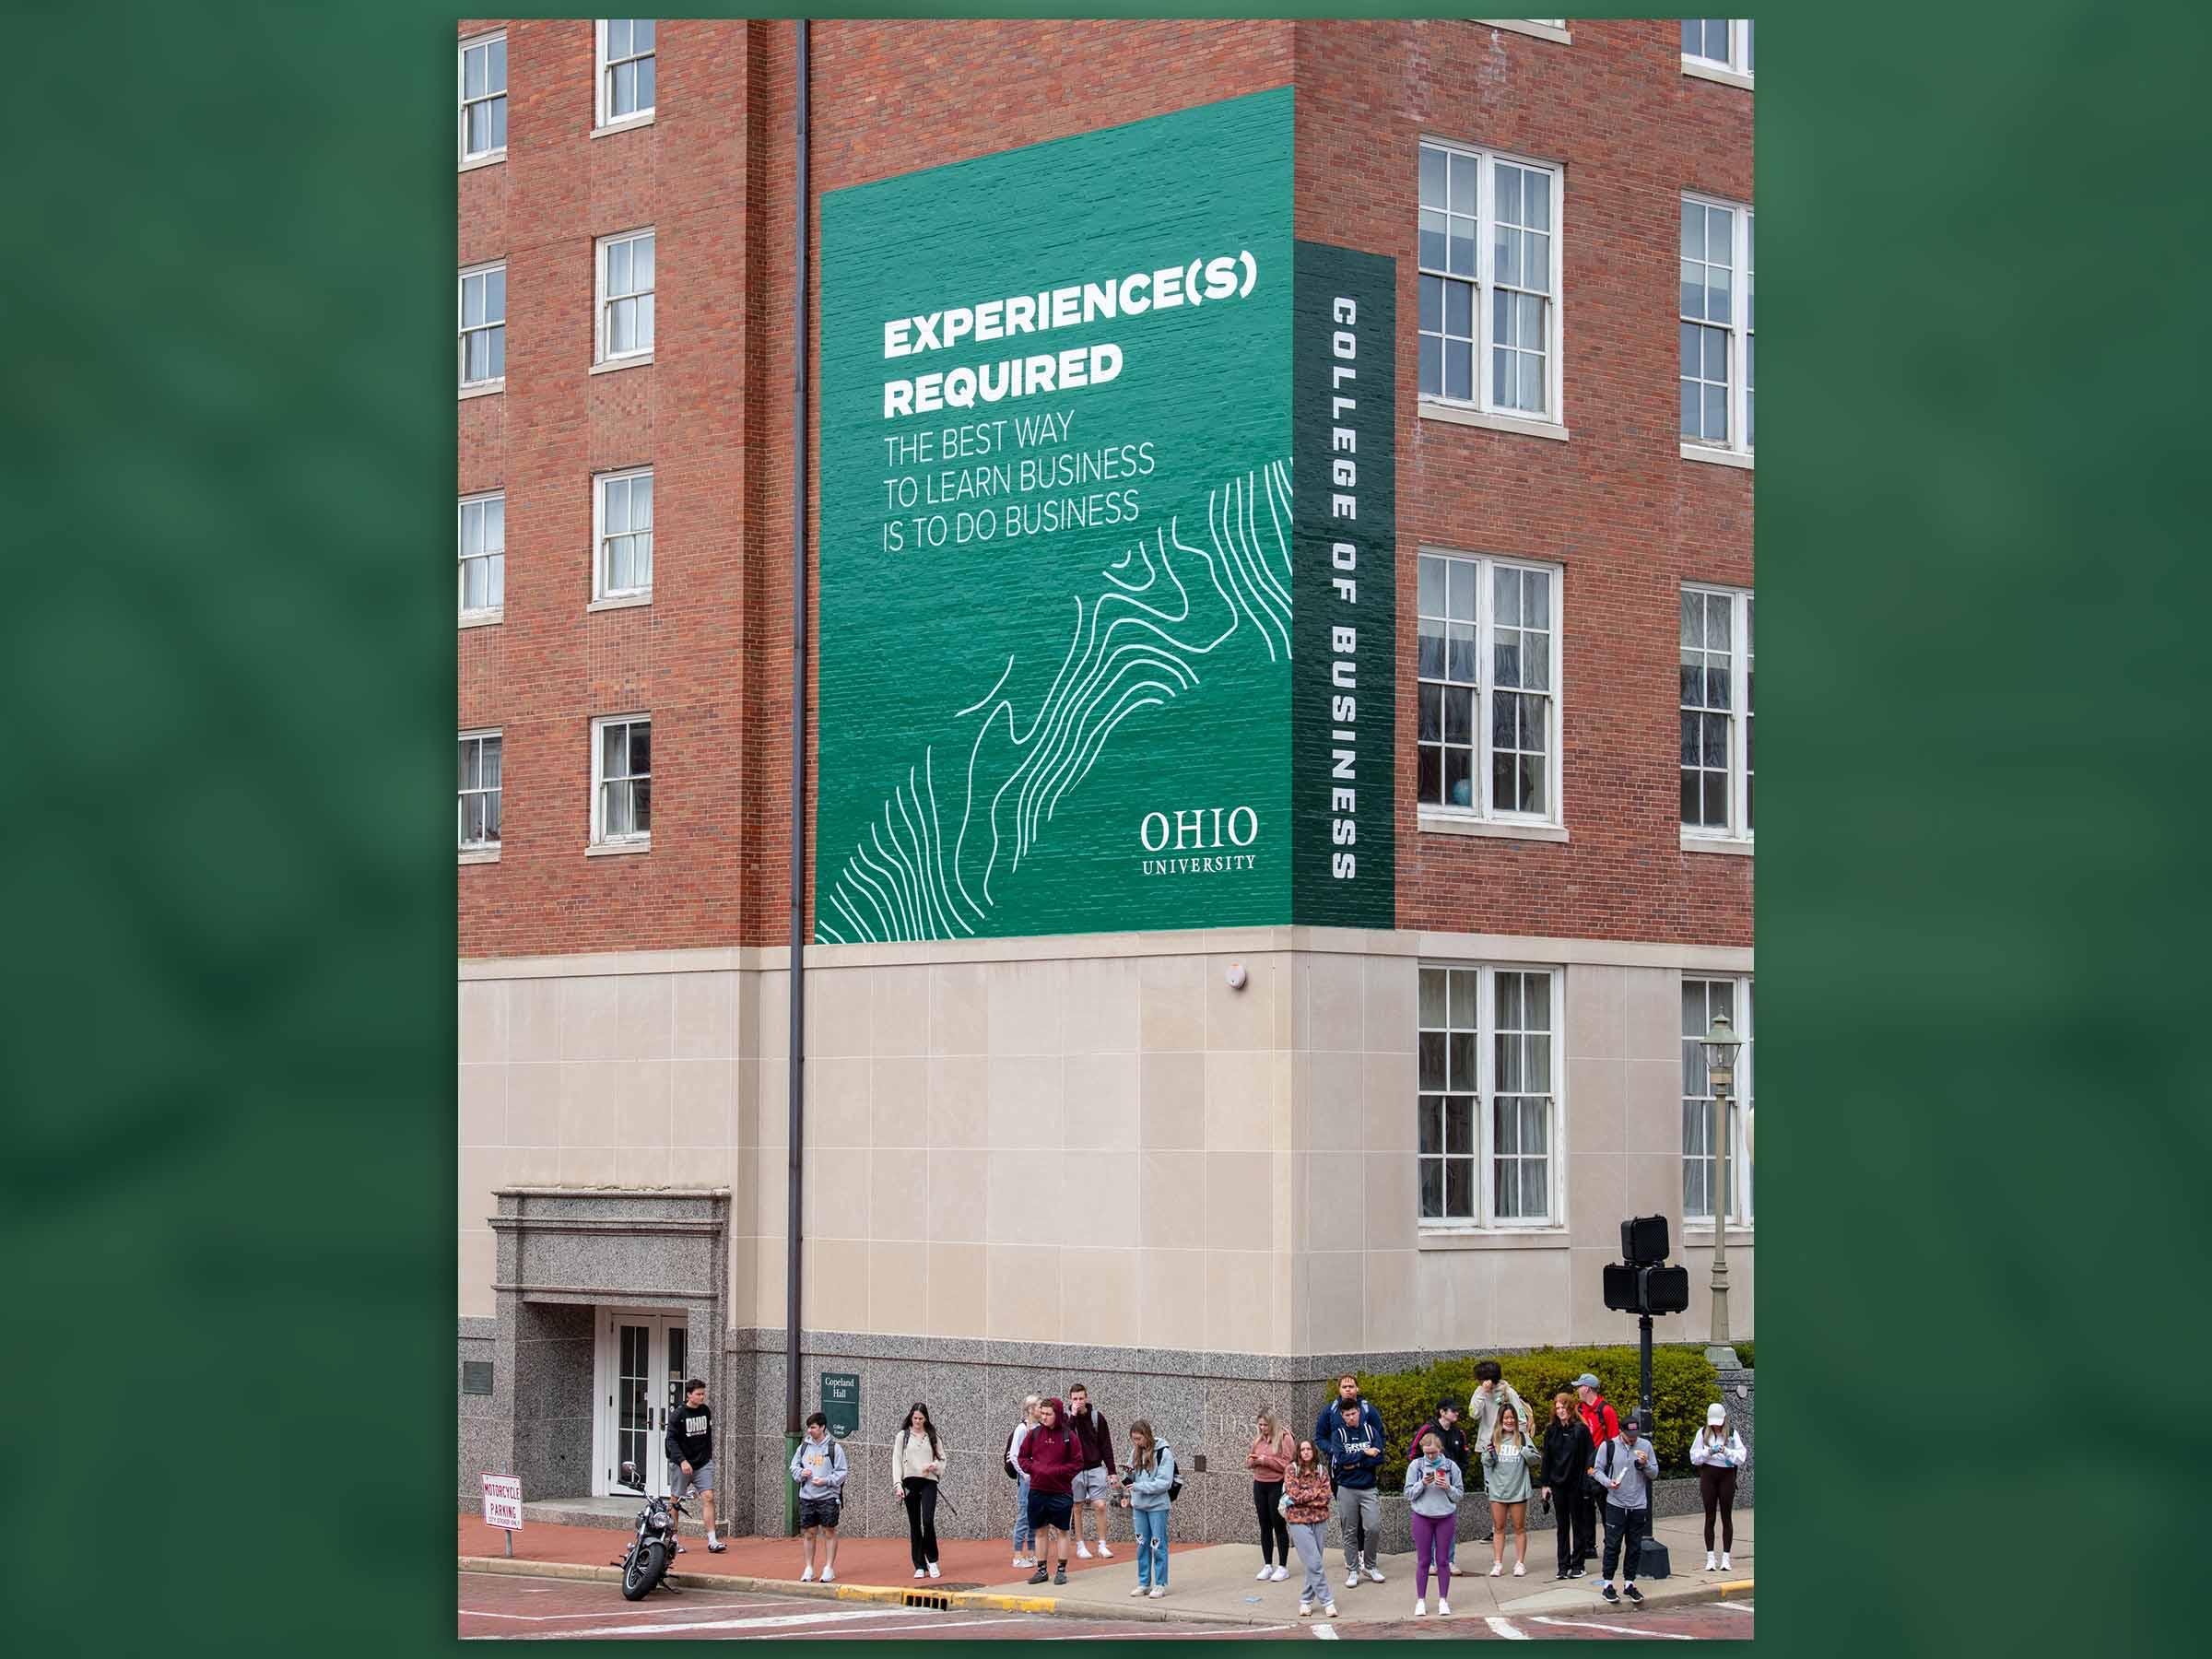 Large banner reading "Experience(s) Required" on Copeland Hall exterior